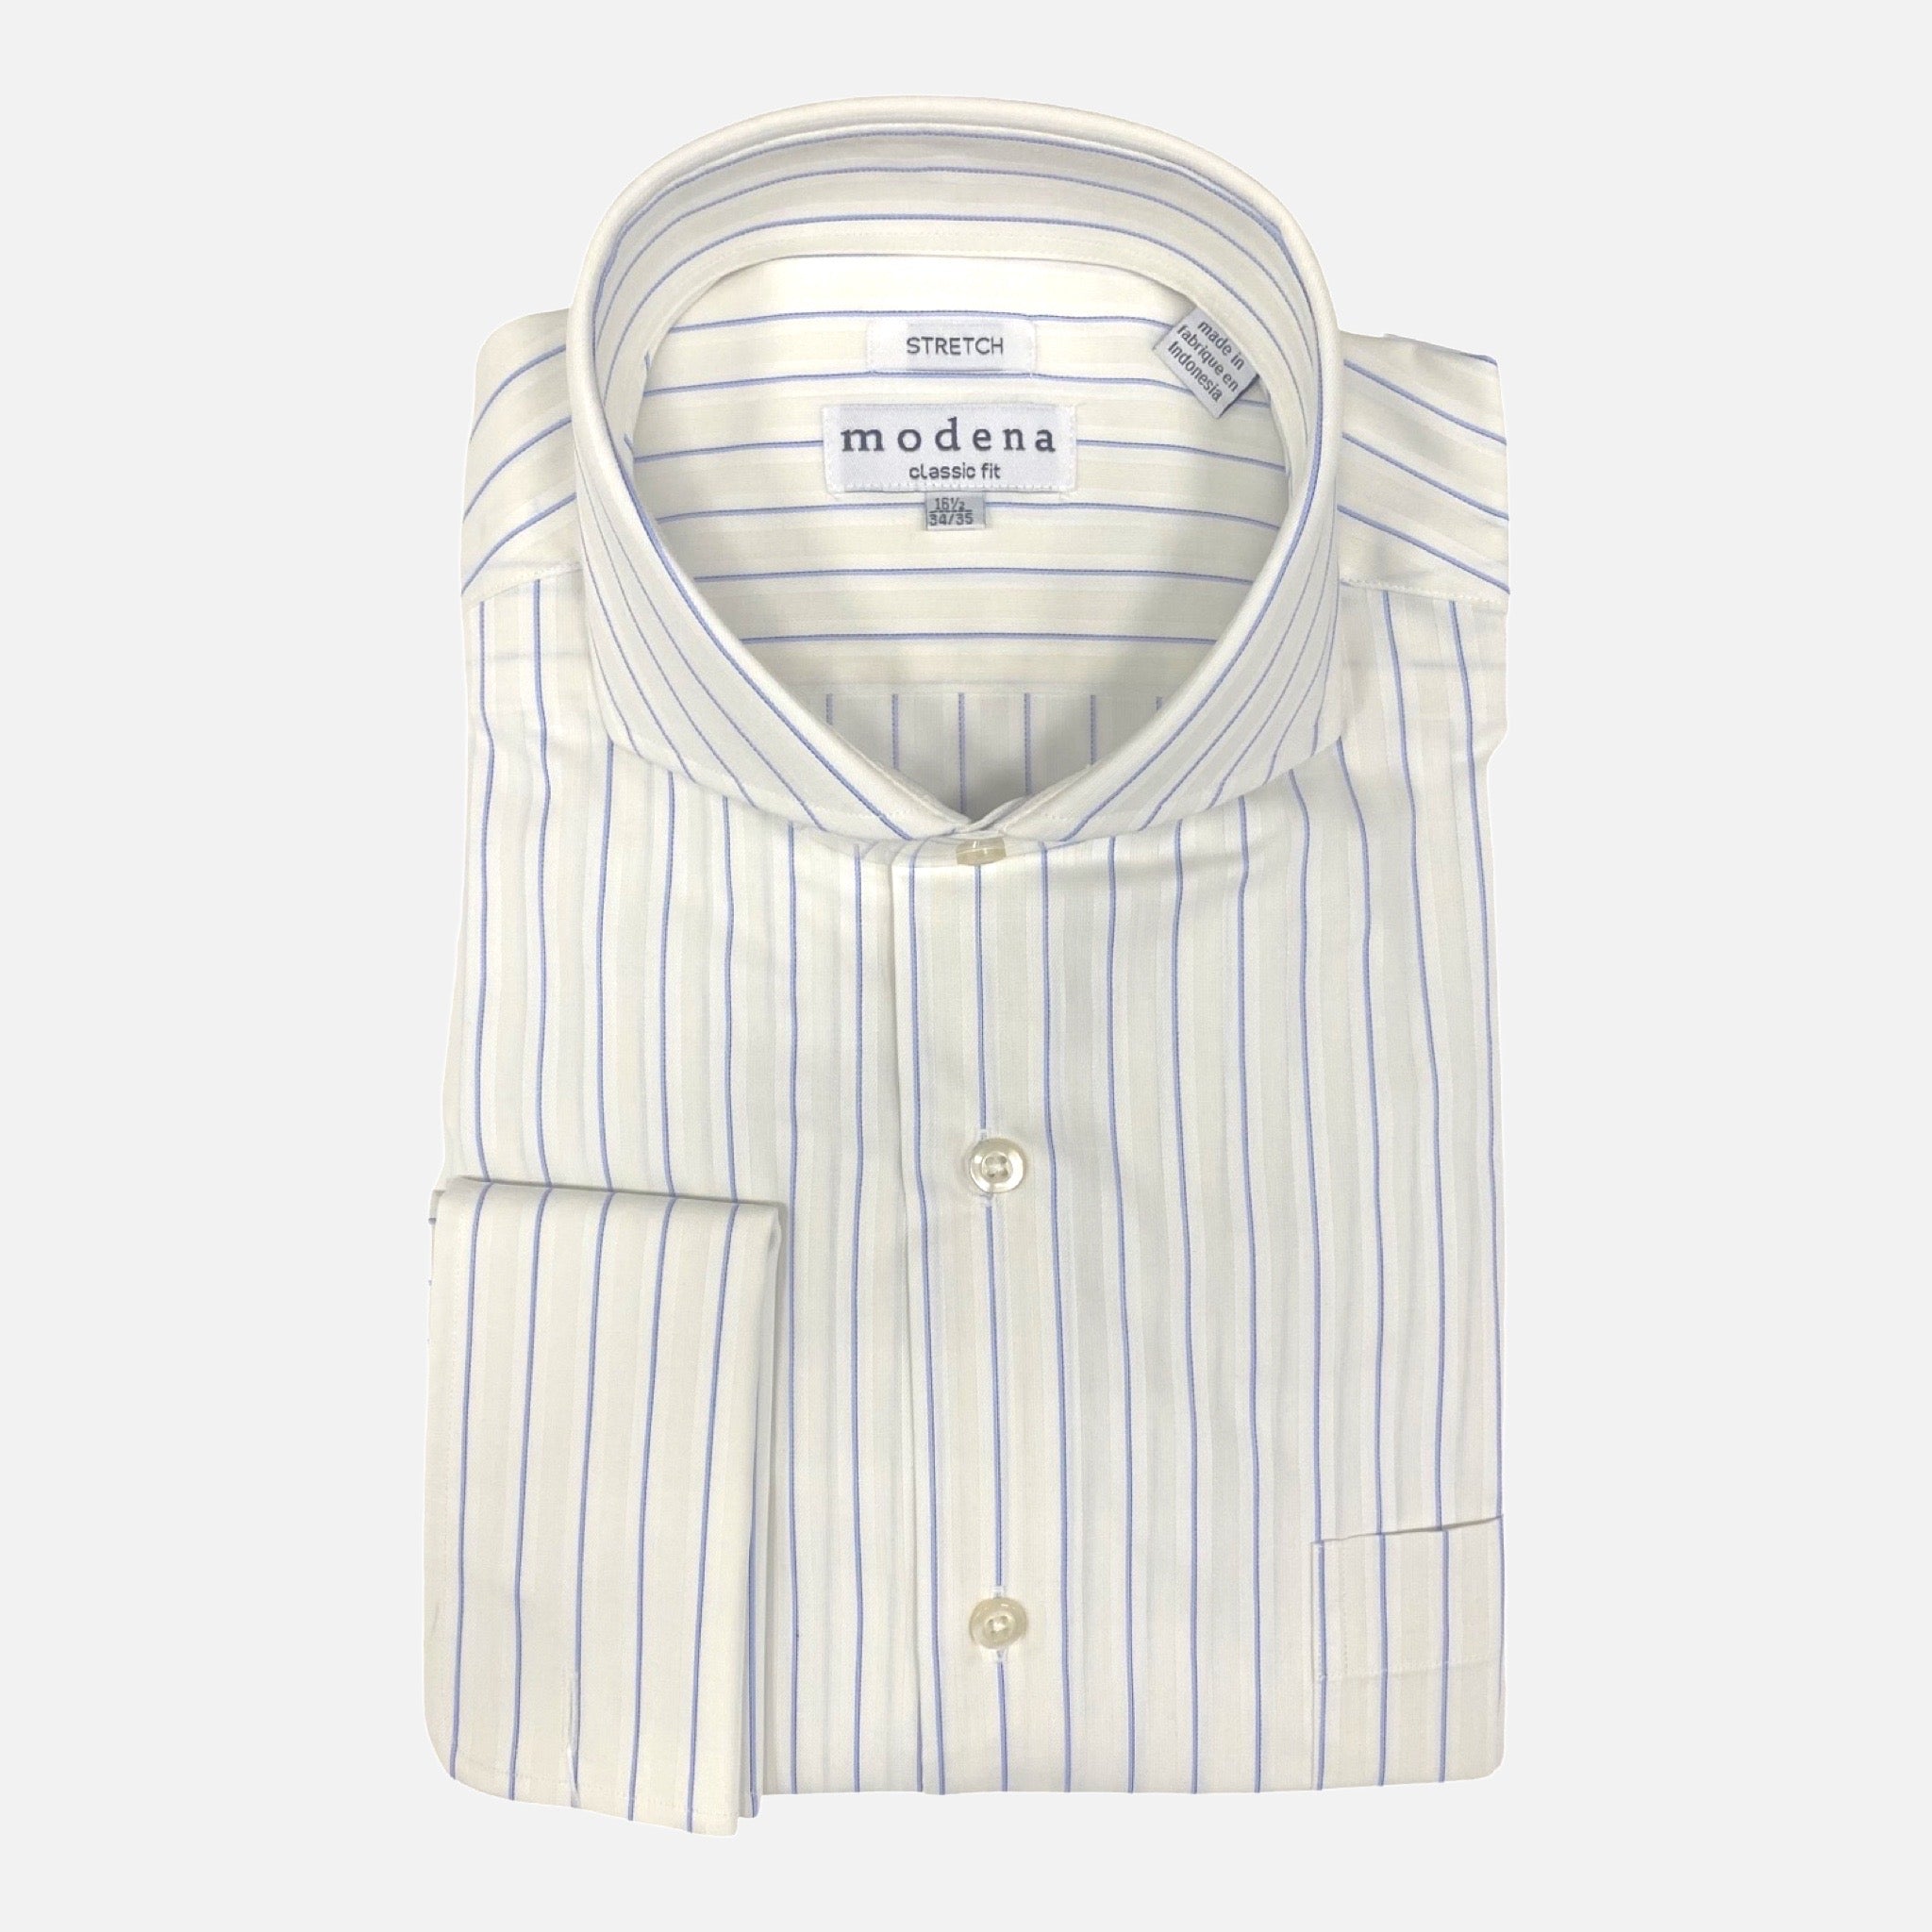 Men’s Off White Shirt with Blue Stripe French Cuff Dress Shirt | Classic Fit